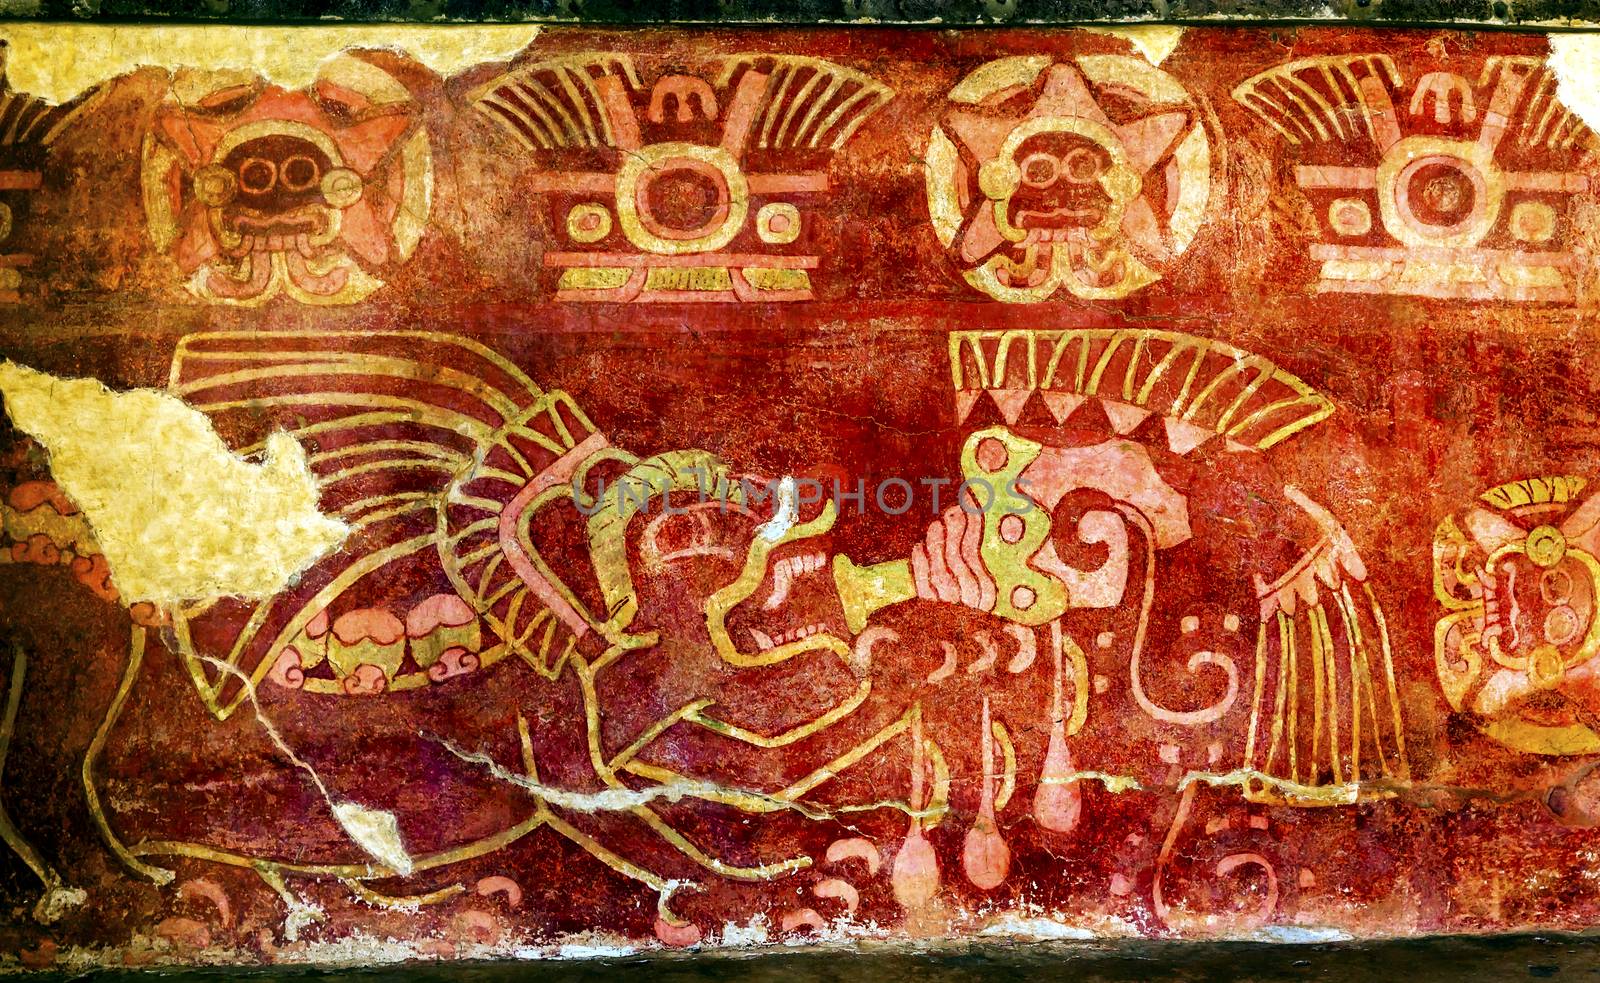 Ancient Drinking Tequila Pulque Painting Mural Wall Indian Ruins at Teotihuacan Mexico City Mexico.  Palace of Quetzalpapaloli.  Ancient ruins date back to 100 to 750AD.


